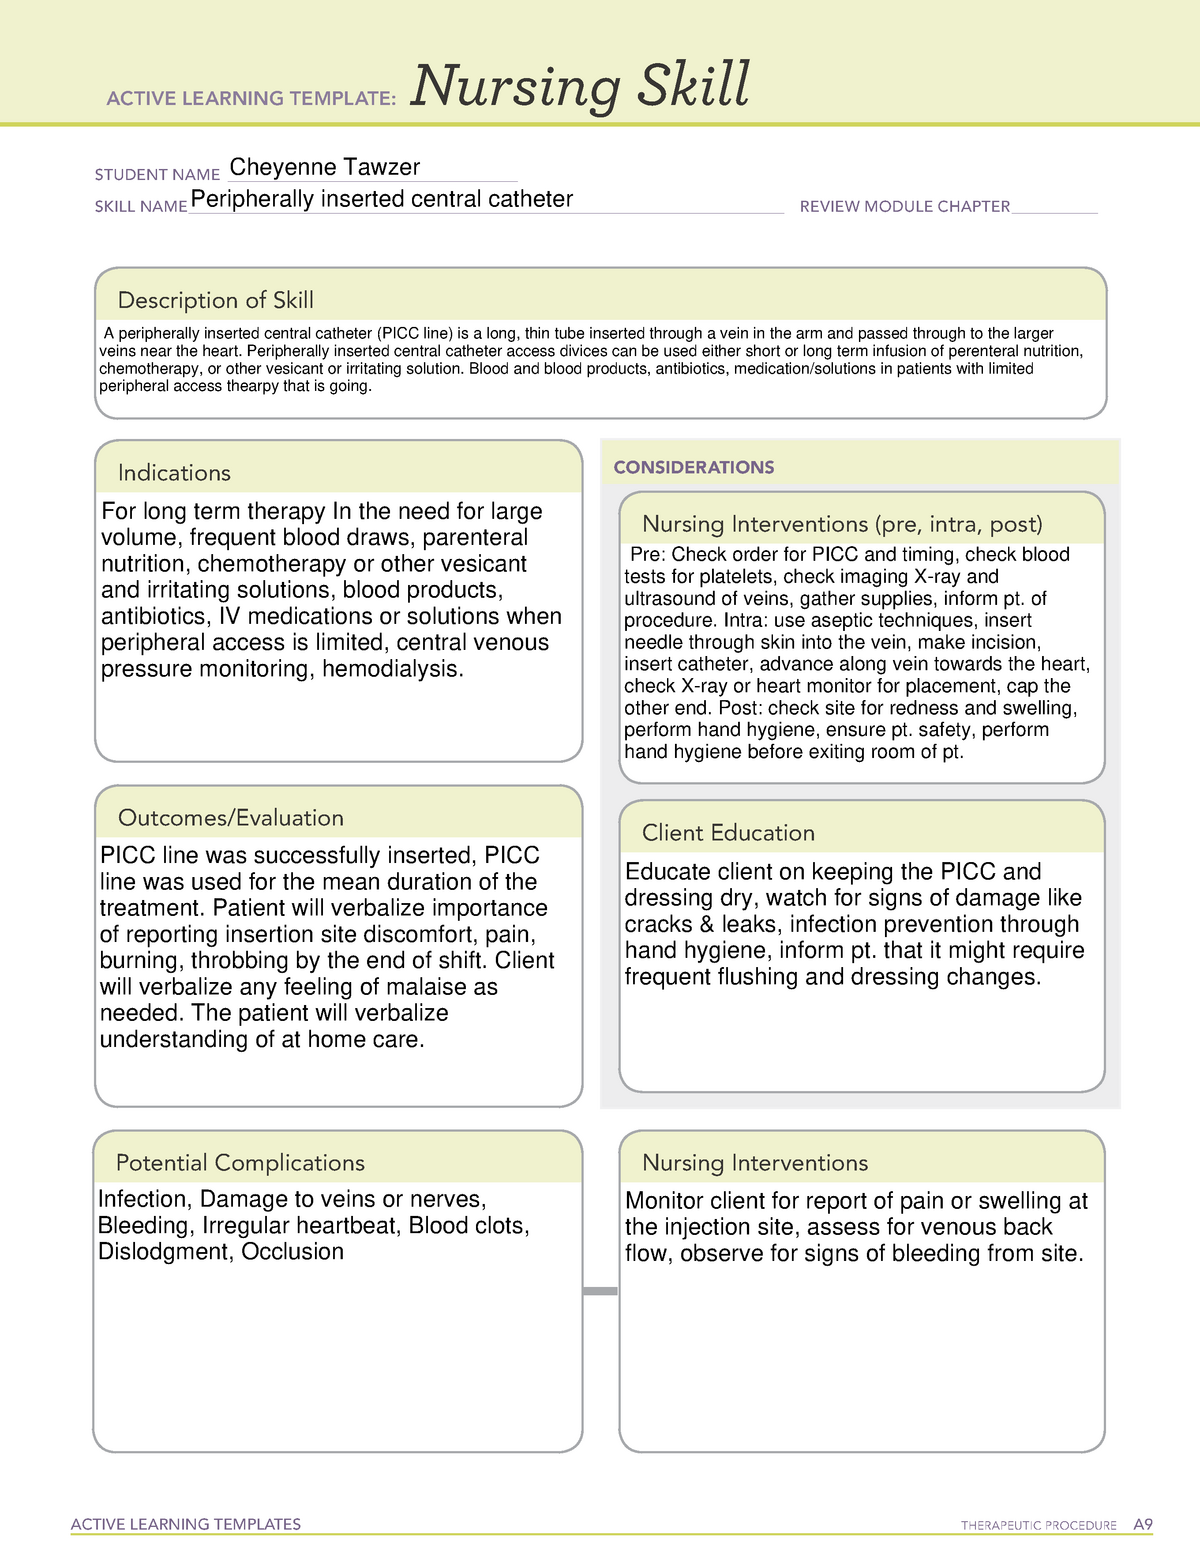 ATI Nursing Skill template PICC Line ACTIVE LEARNING TEMPLATES